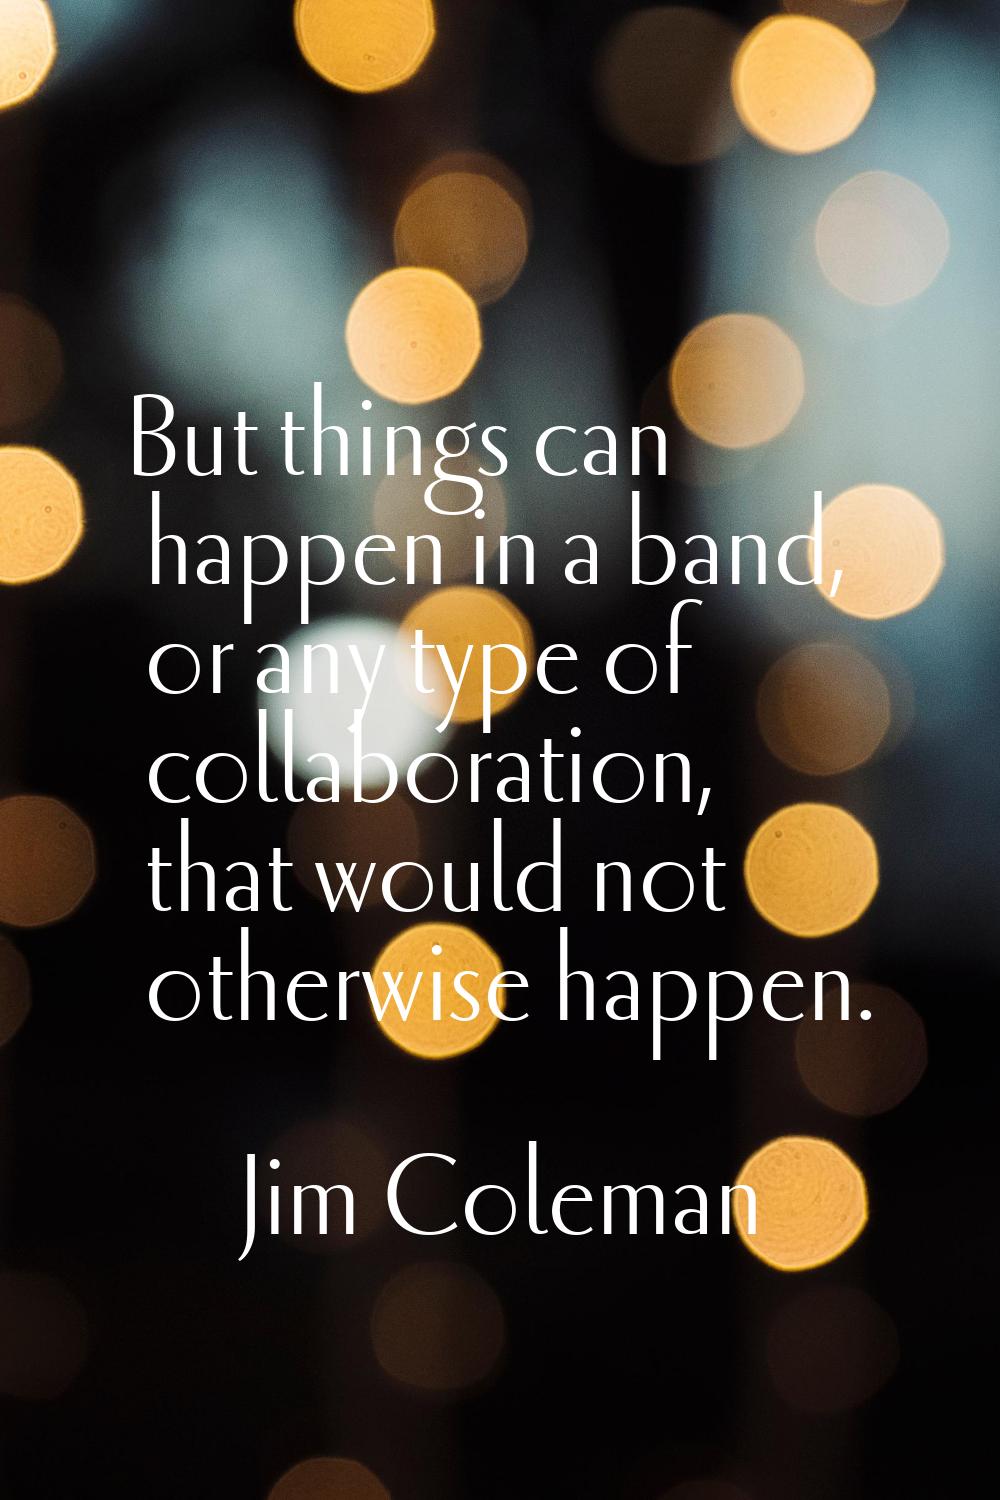 But things can happen in a band, or any type of collaboration, that would not otherwise happen.